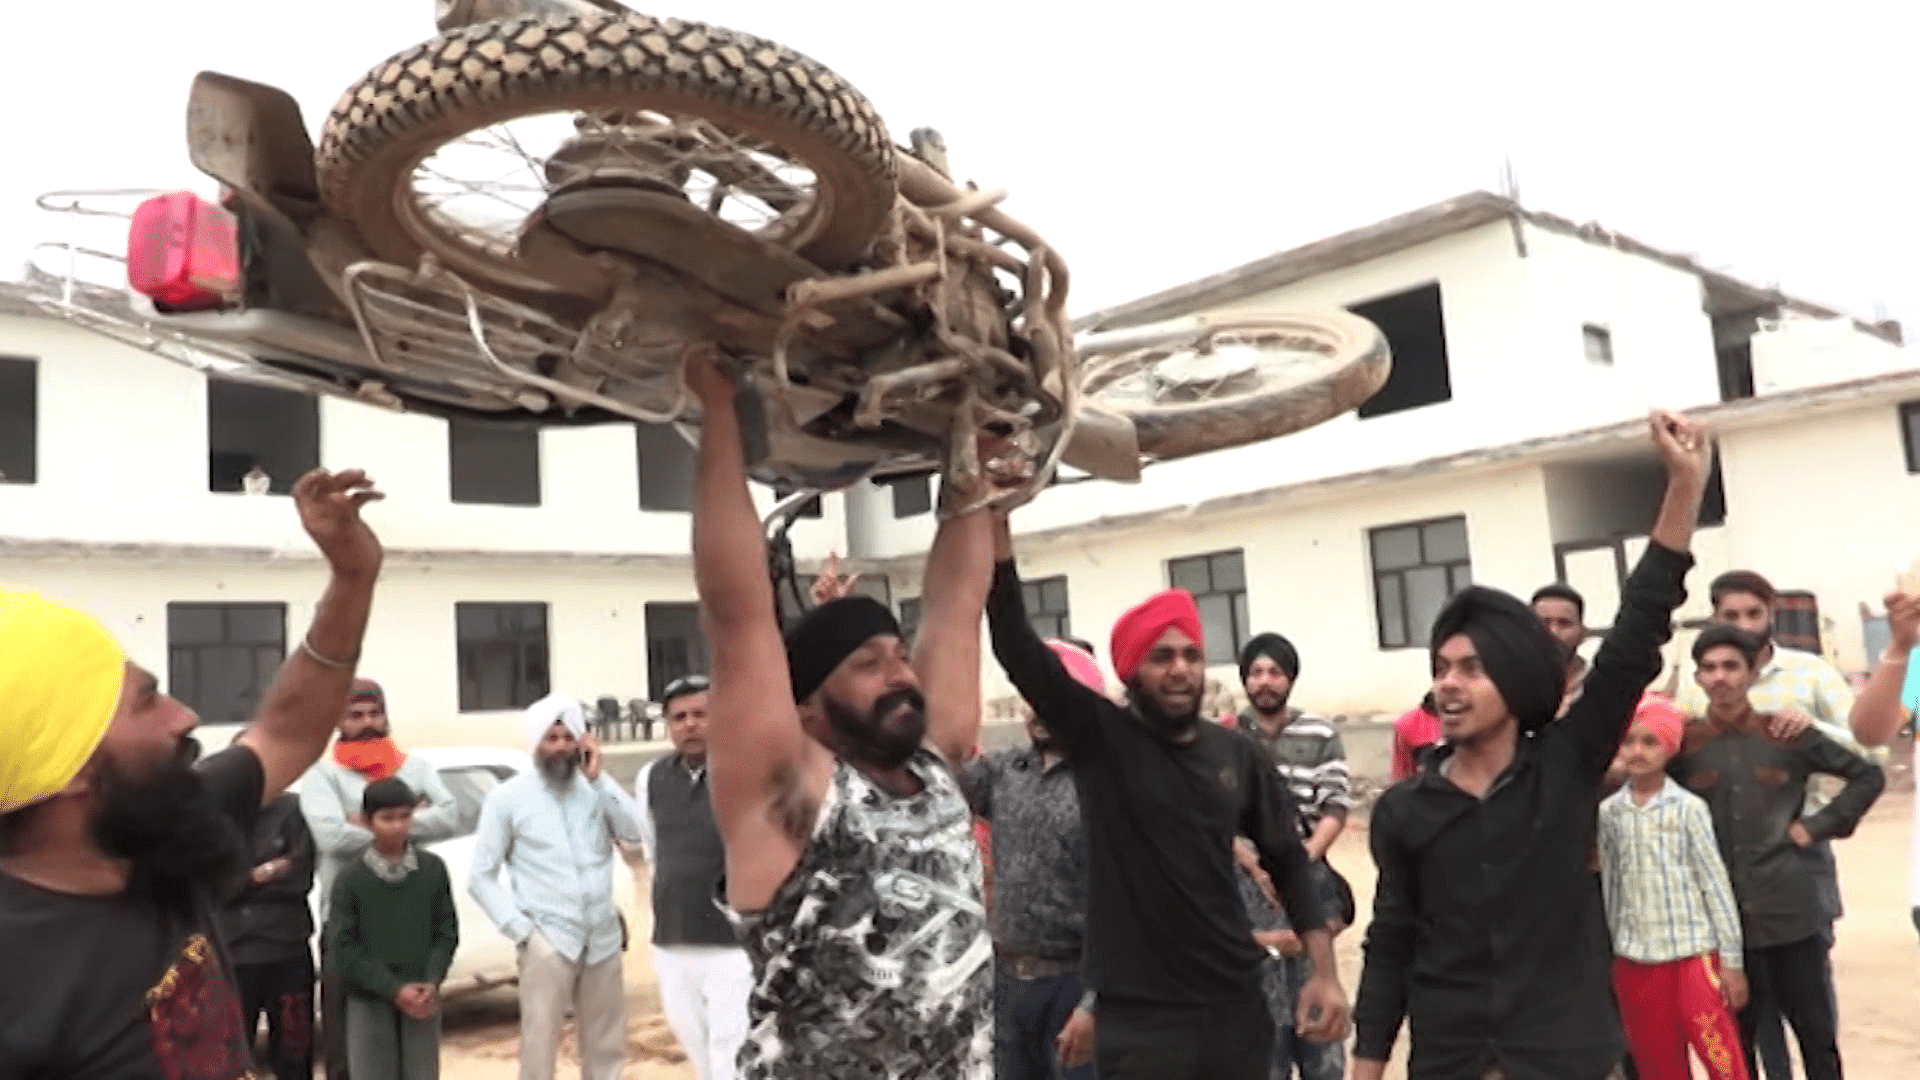 Amandeep Singh from Kurukshetra, Haryana, can withstand being run over,  lift a motorbike above his head and smash metal bars across his chest. (Photo: AP/Caters News screengrab)